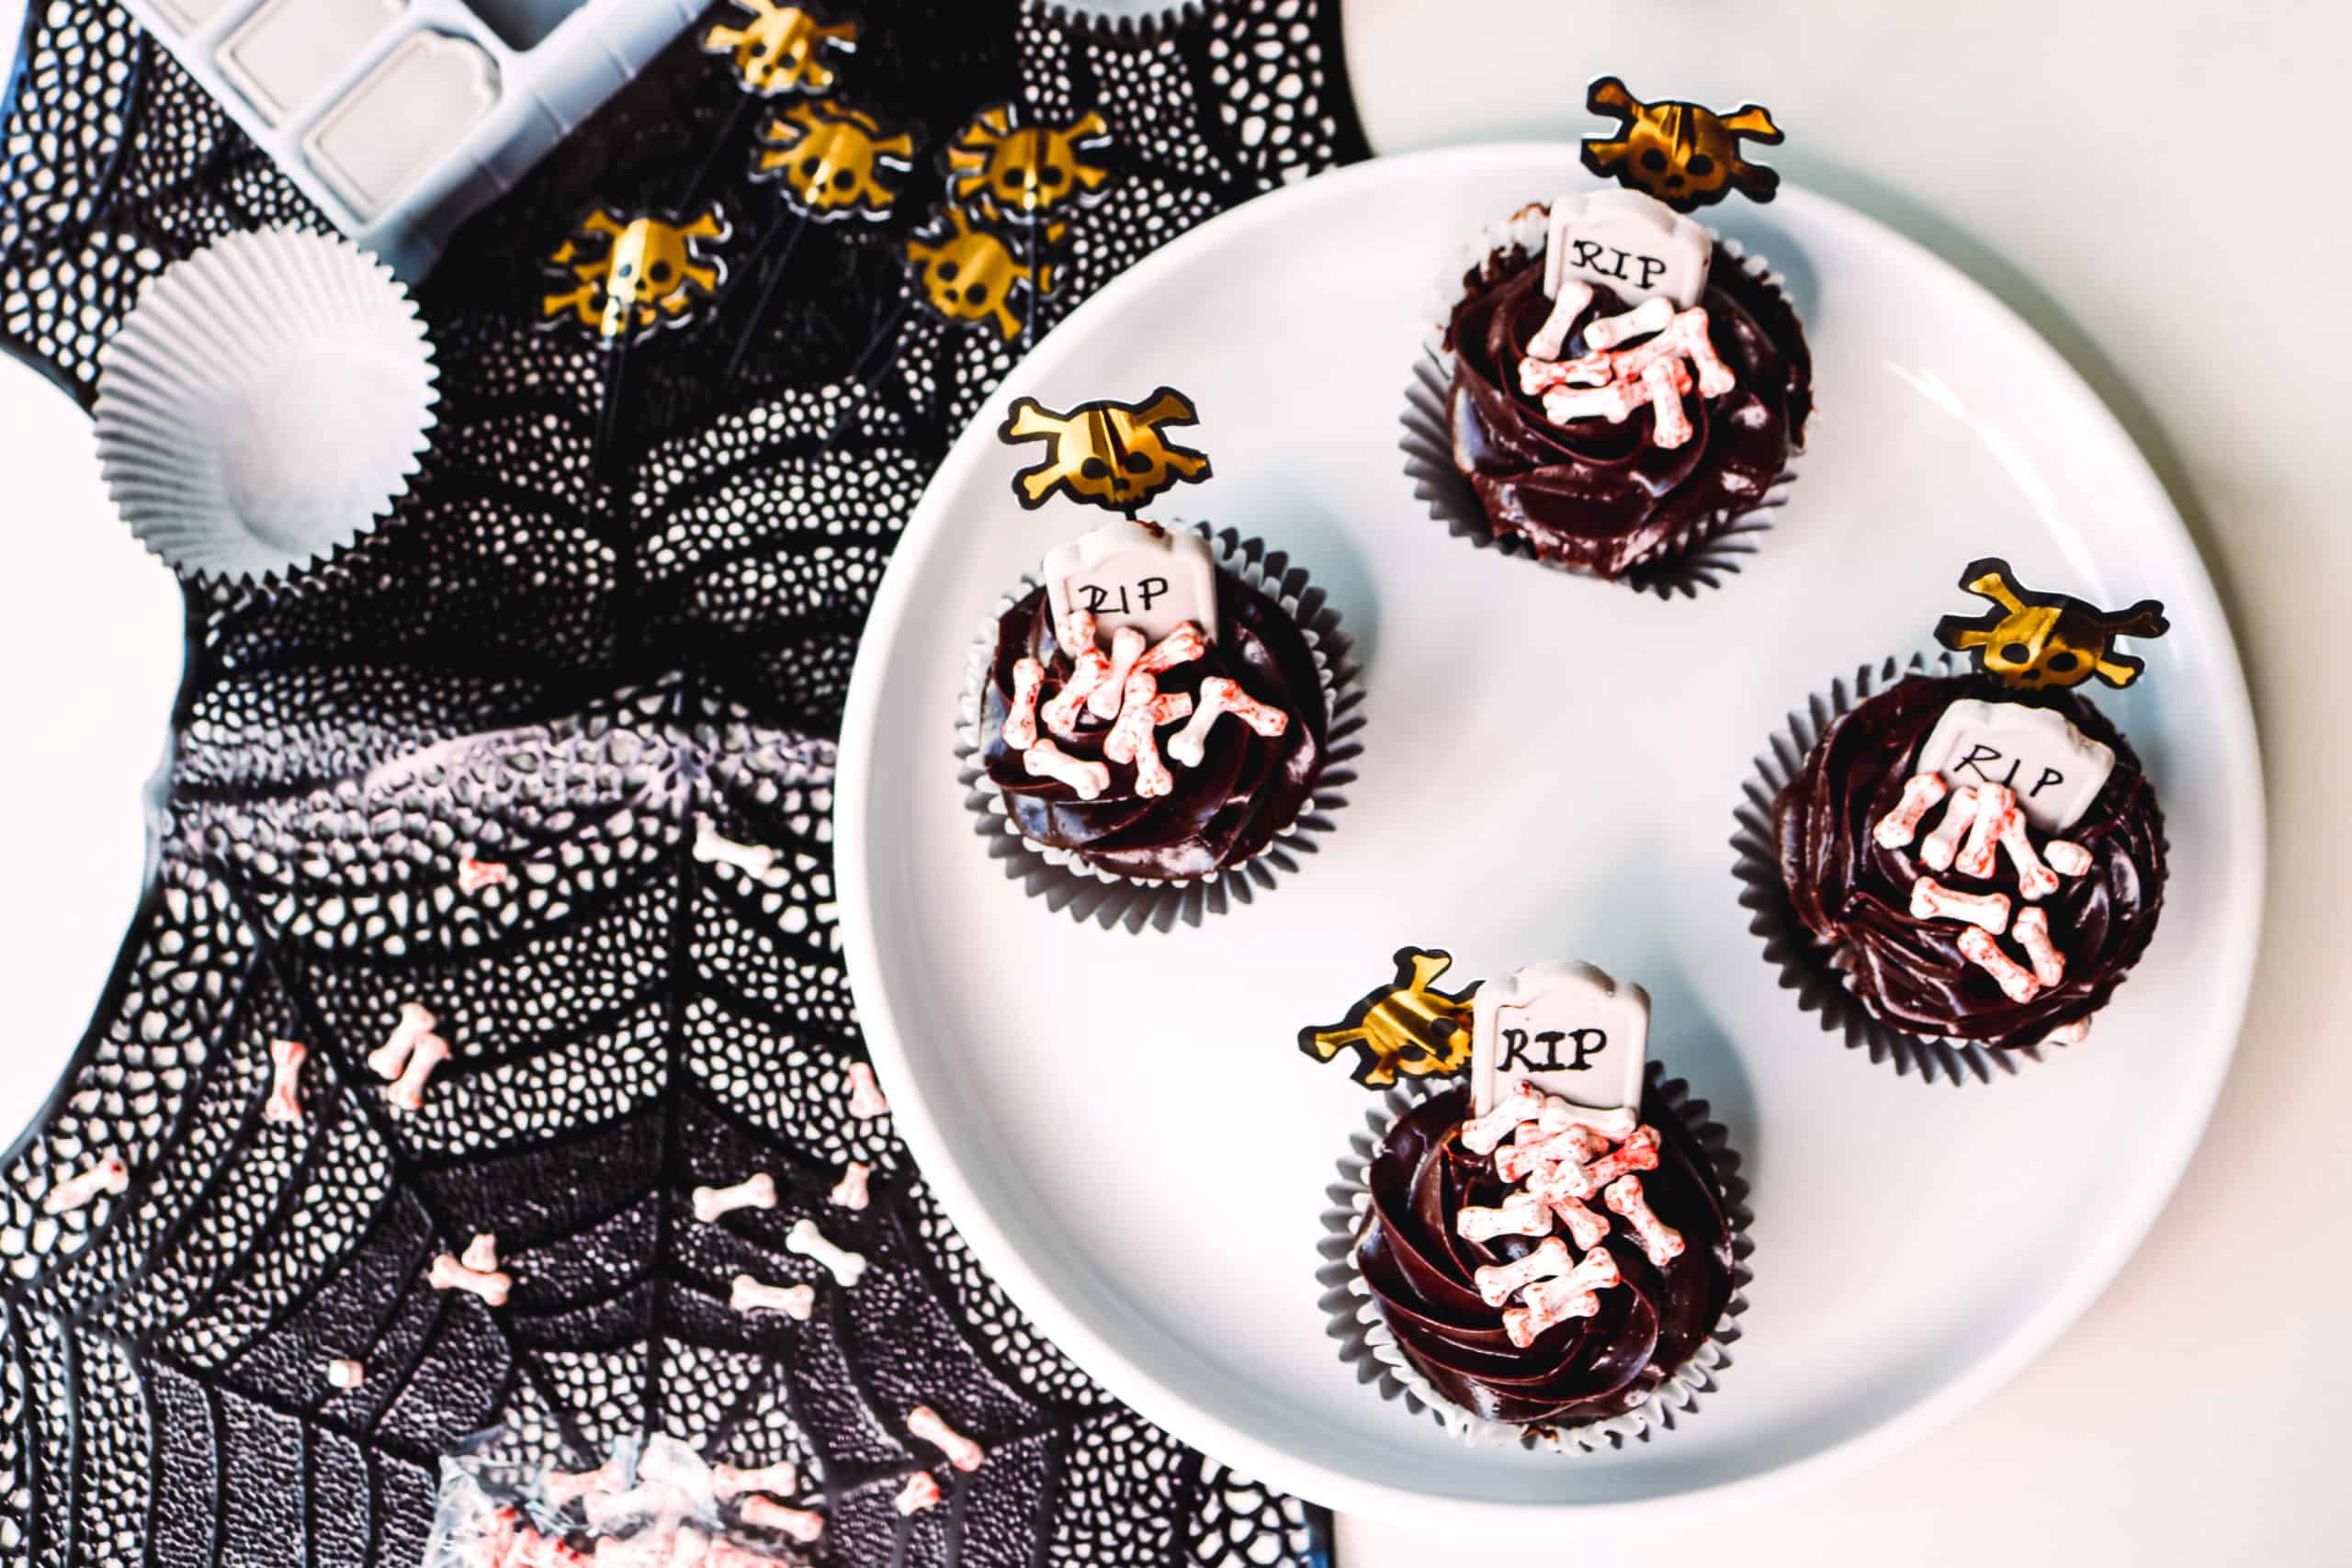 How to make easy and fun Halloween treats at home